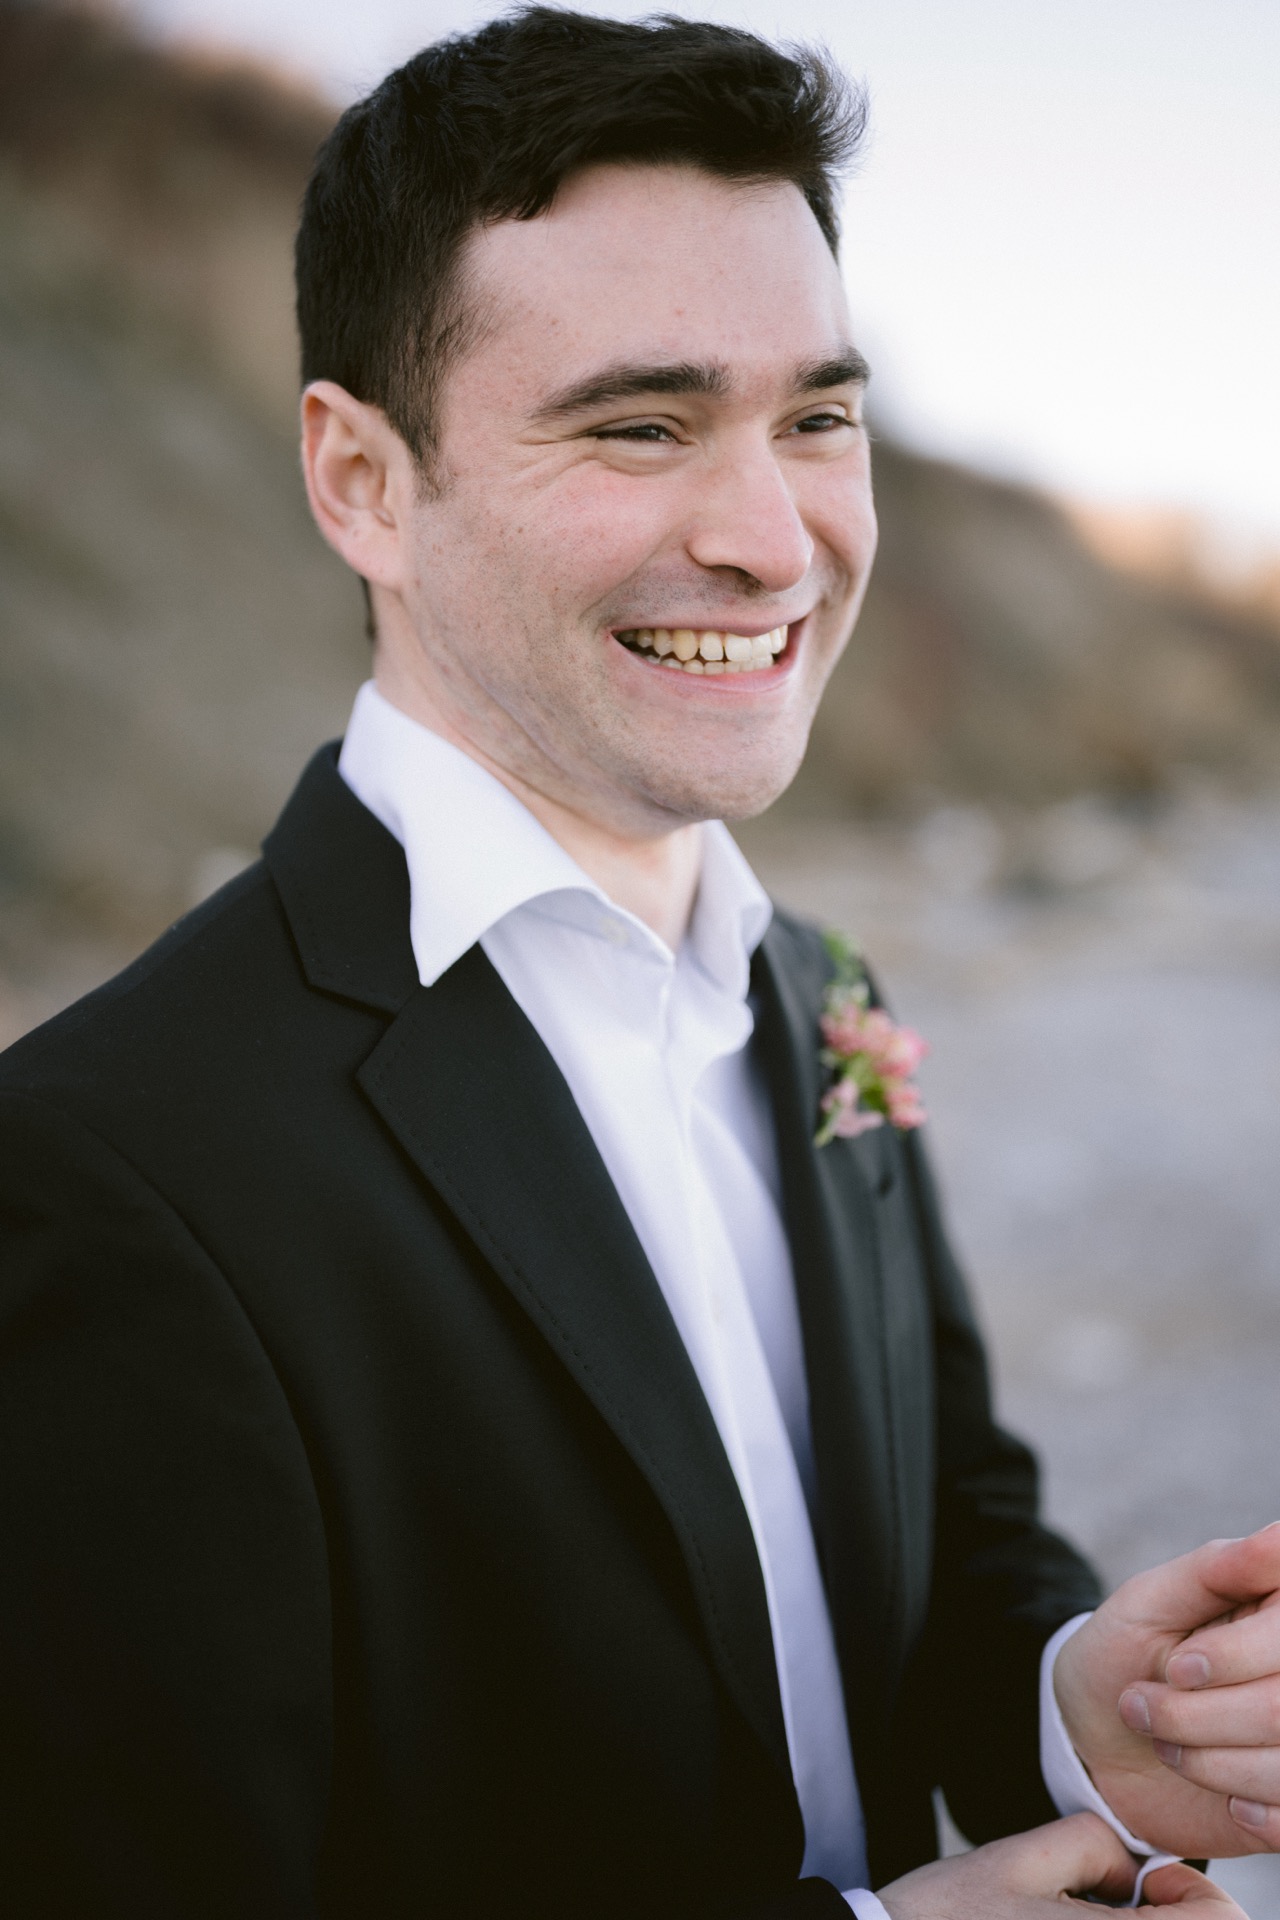 A groom smile happily after a wedding ceremony at Sunrise Hill.